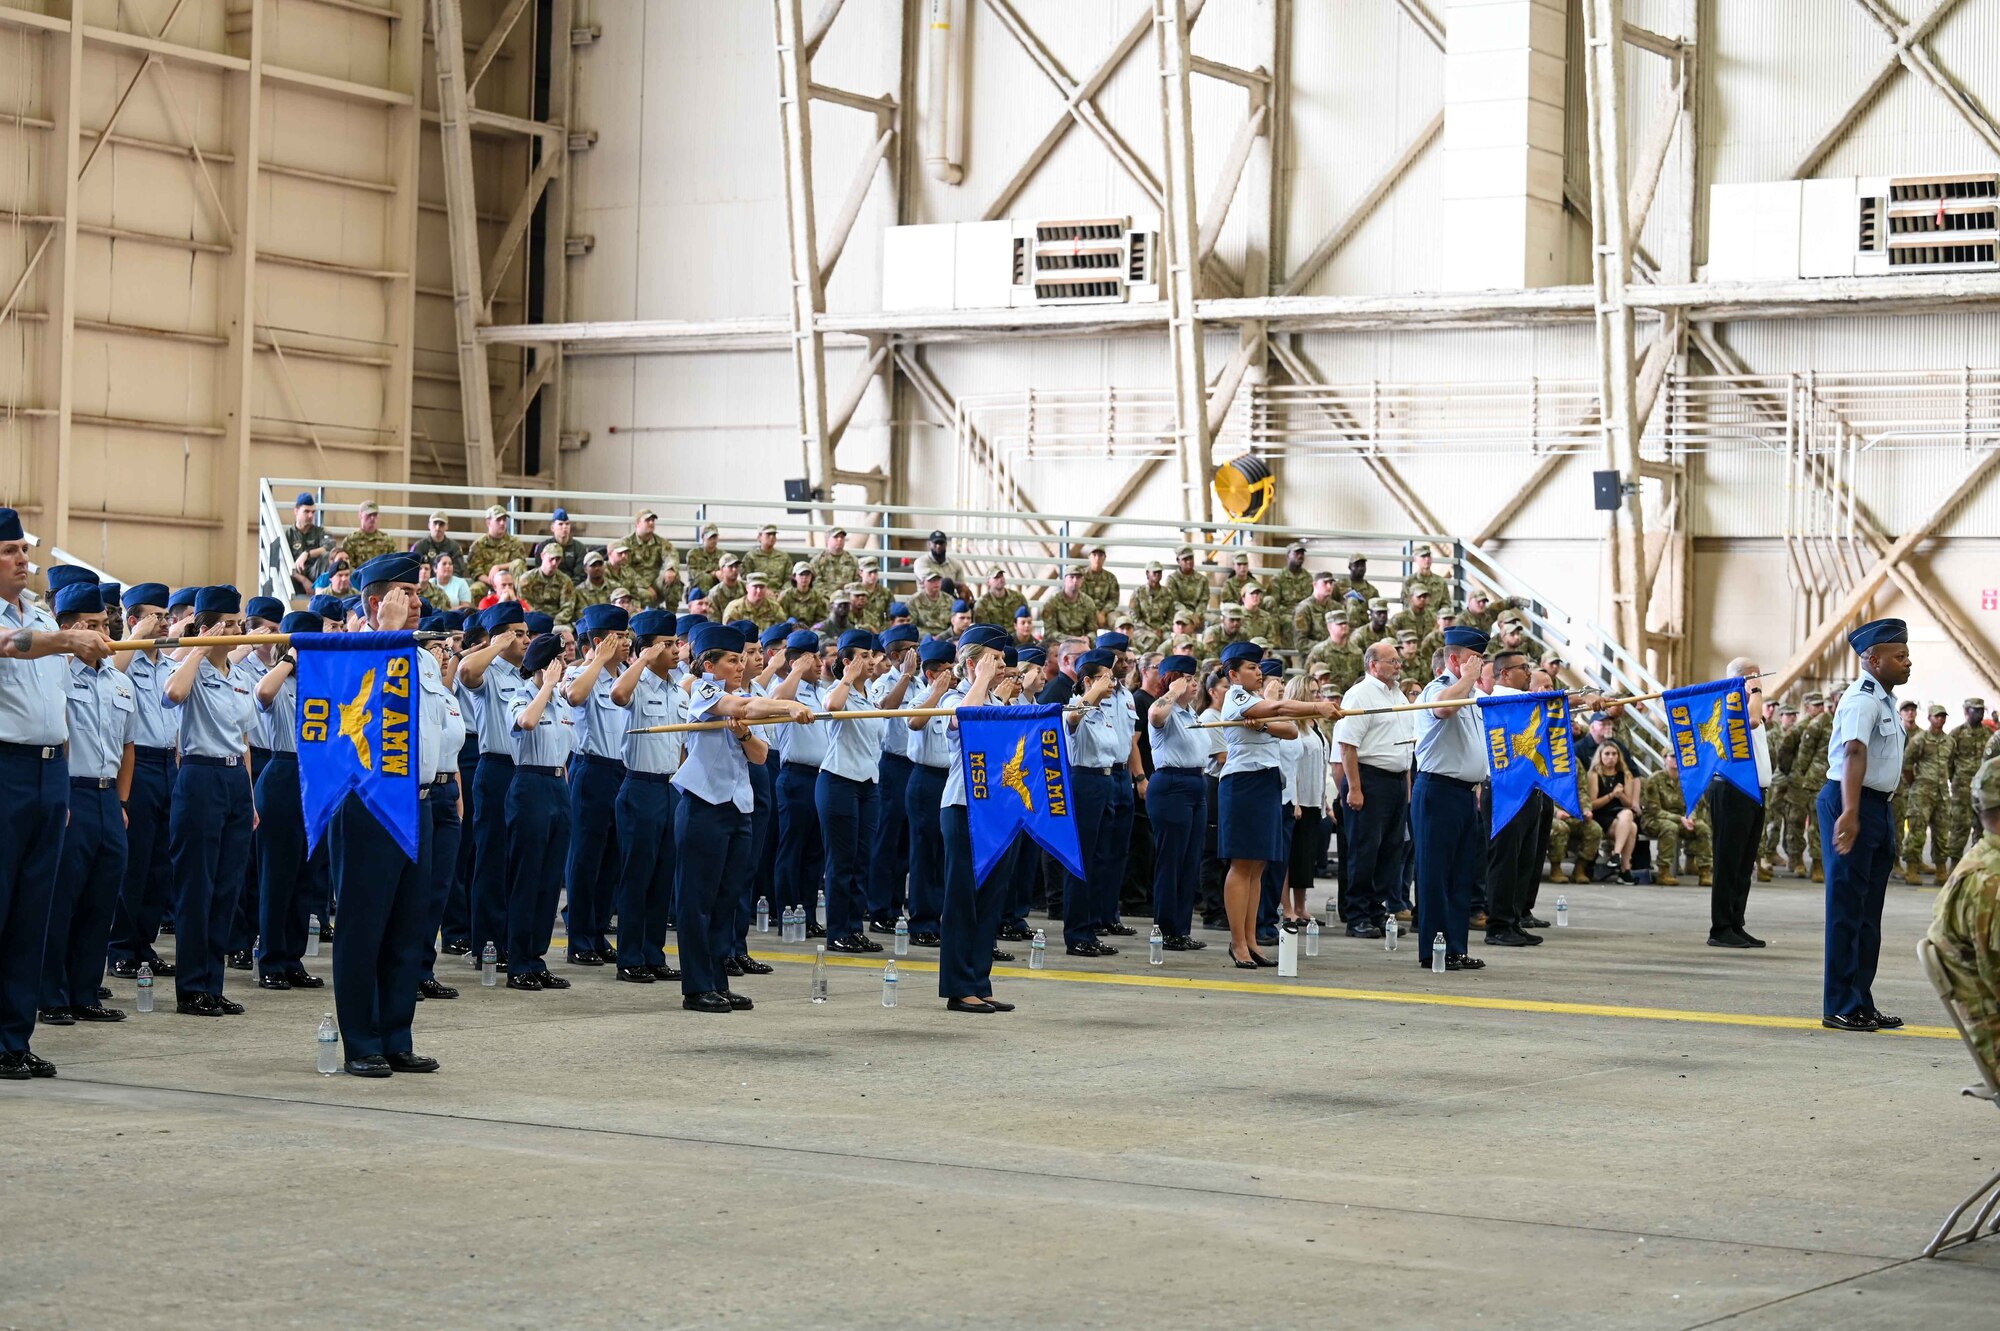 A formation salutes the flag during the playing of a national anthem at the wing change of command at Altus Air Force Base, Oklahoma, July 14, 2023. Col. Jeffrey Marshall assumed command of the 97th Air Mobility Wing during the ceremony. (U.S. Air Force photo by Airman 1st Class Kari Degraffenreed)